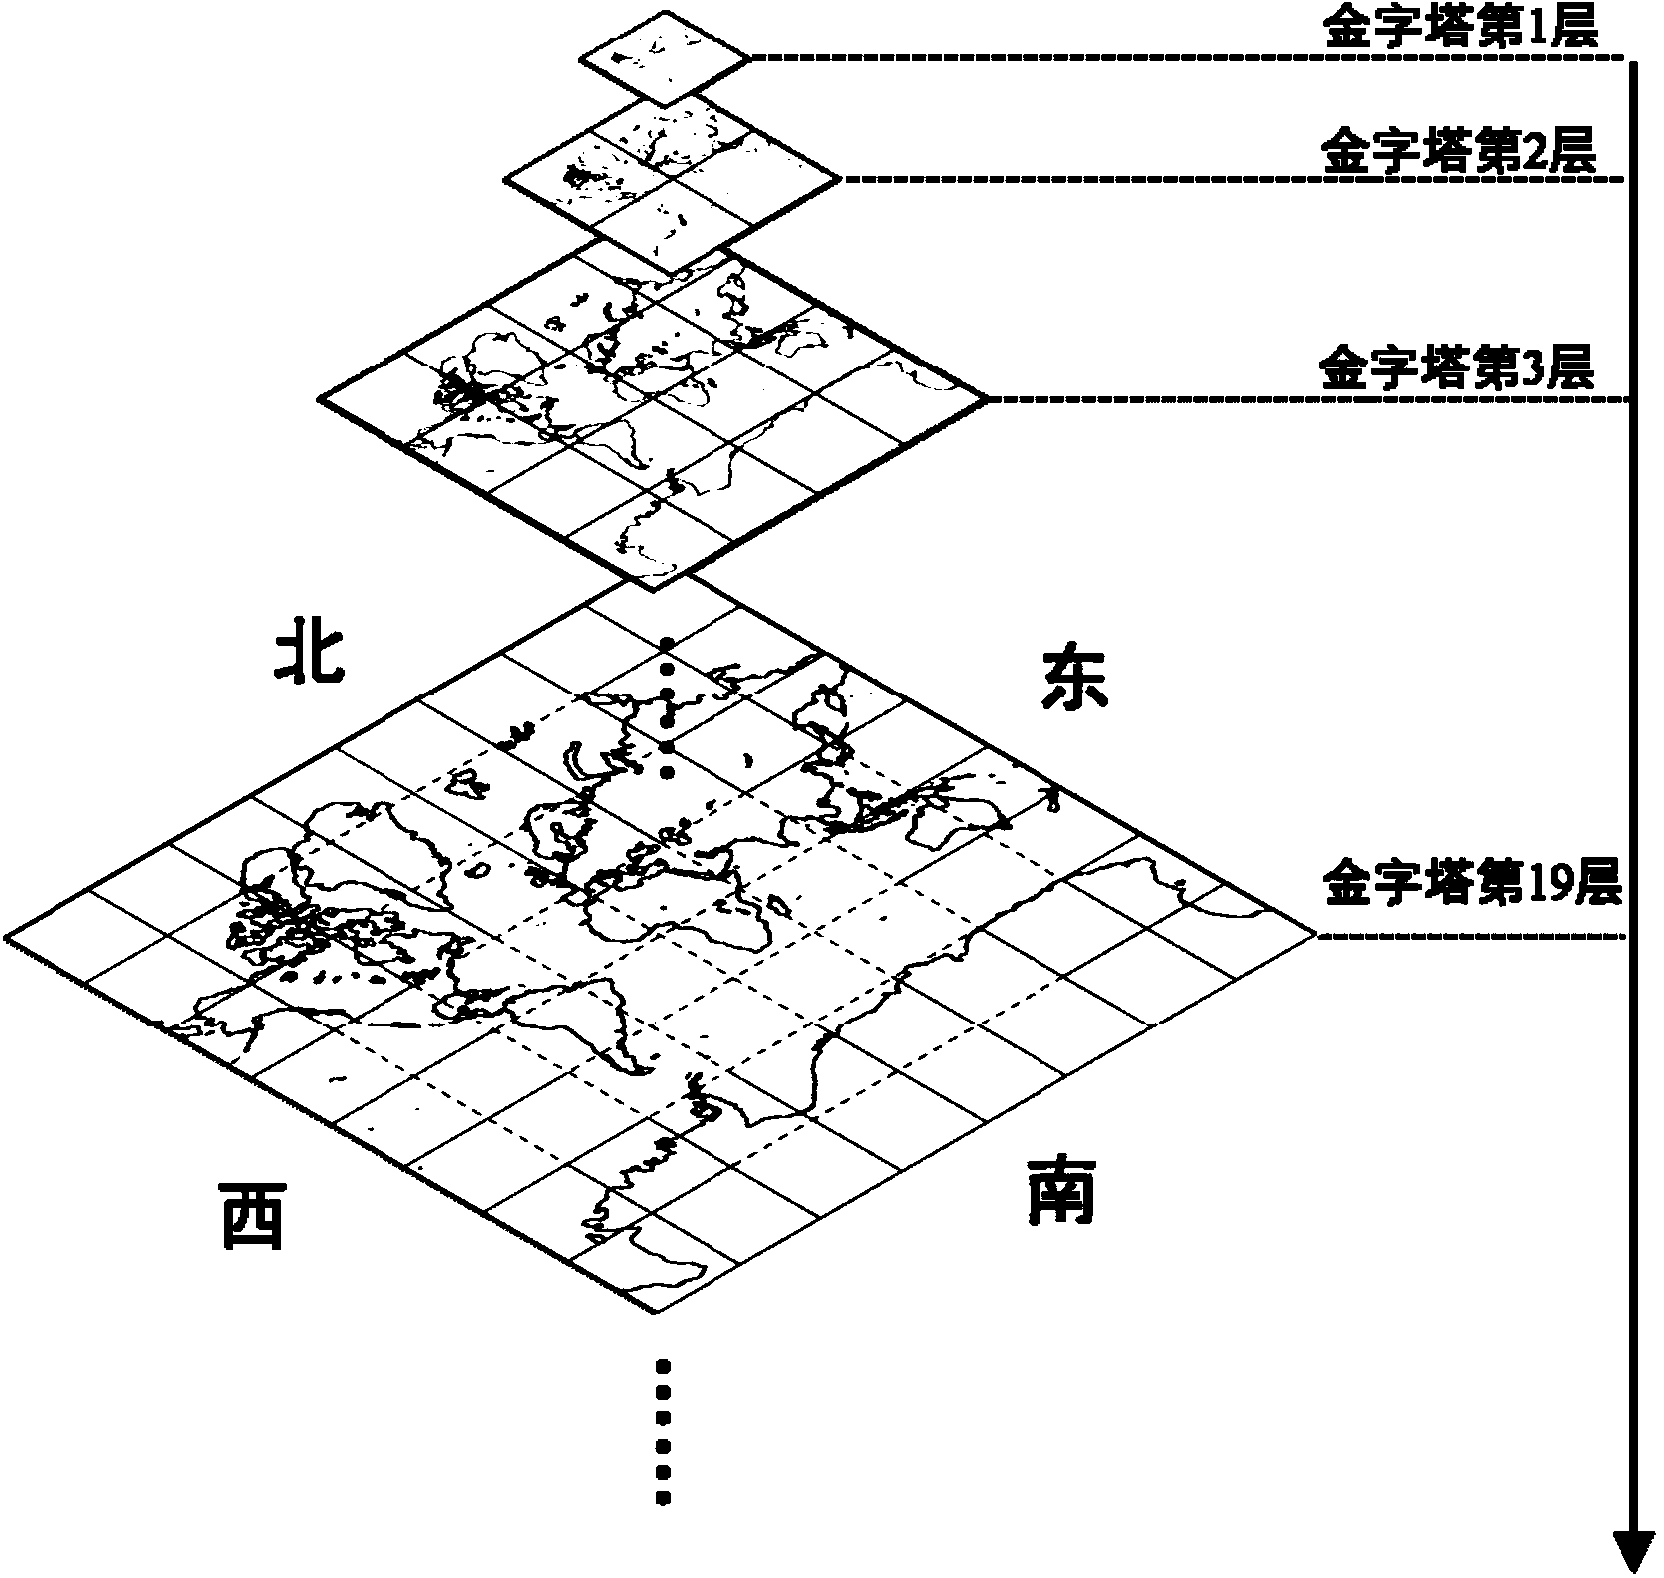 Implement method of lightweight-class global multi-dimensional remote-sensing image network map service